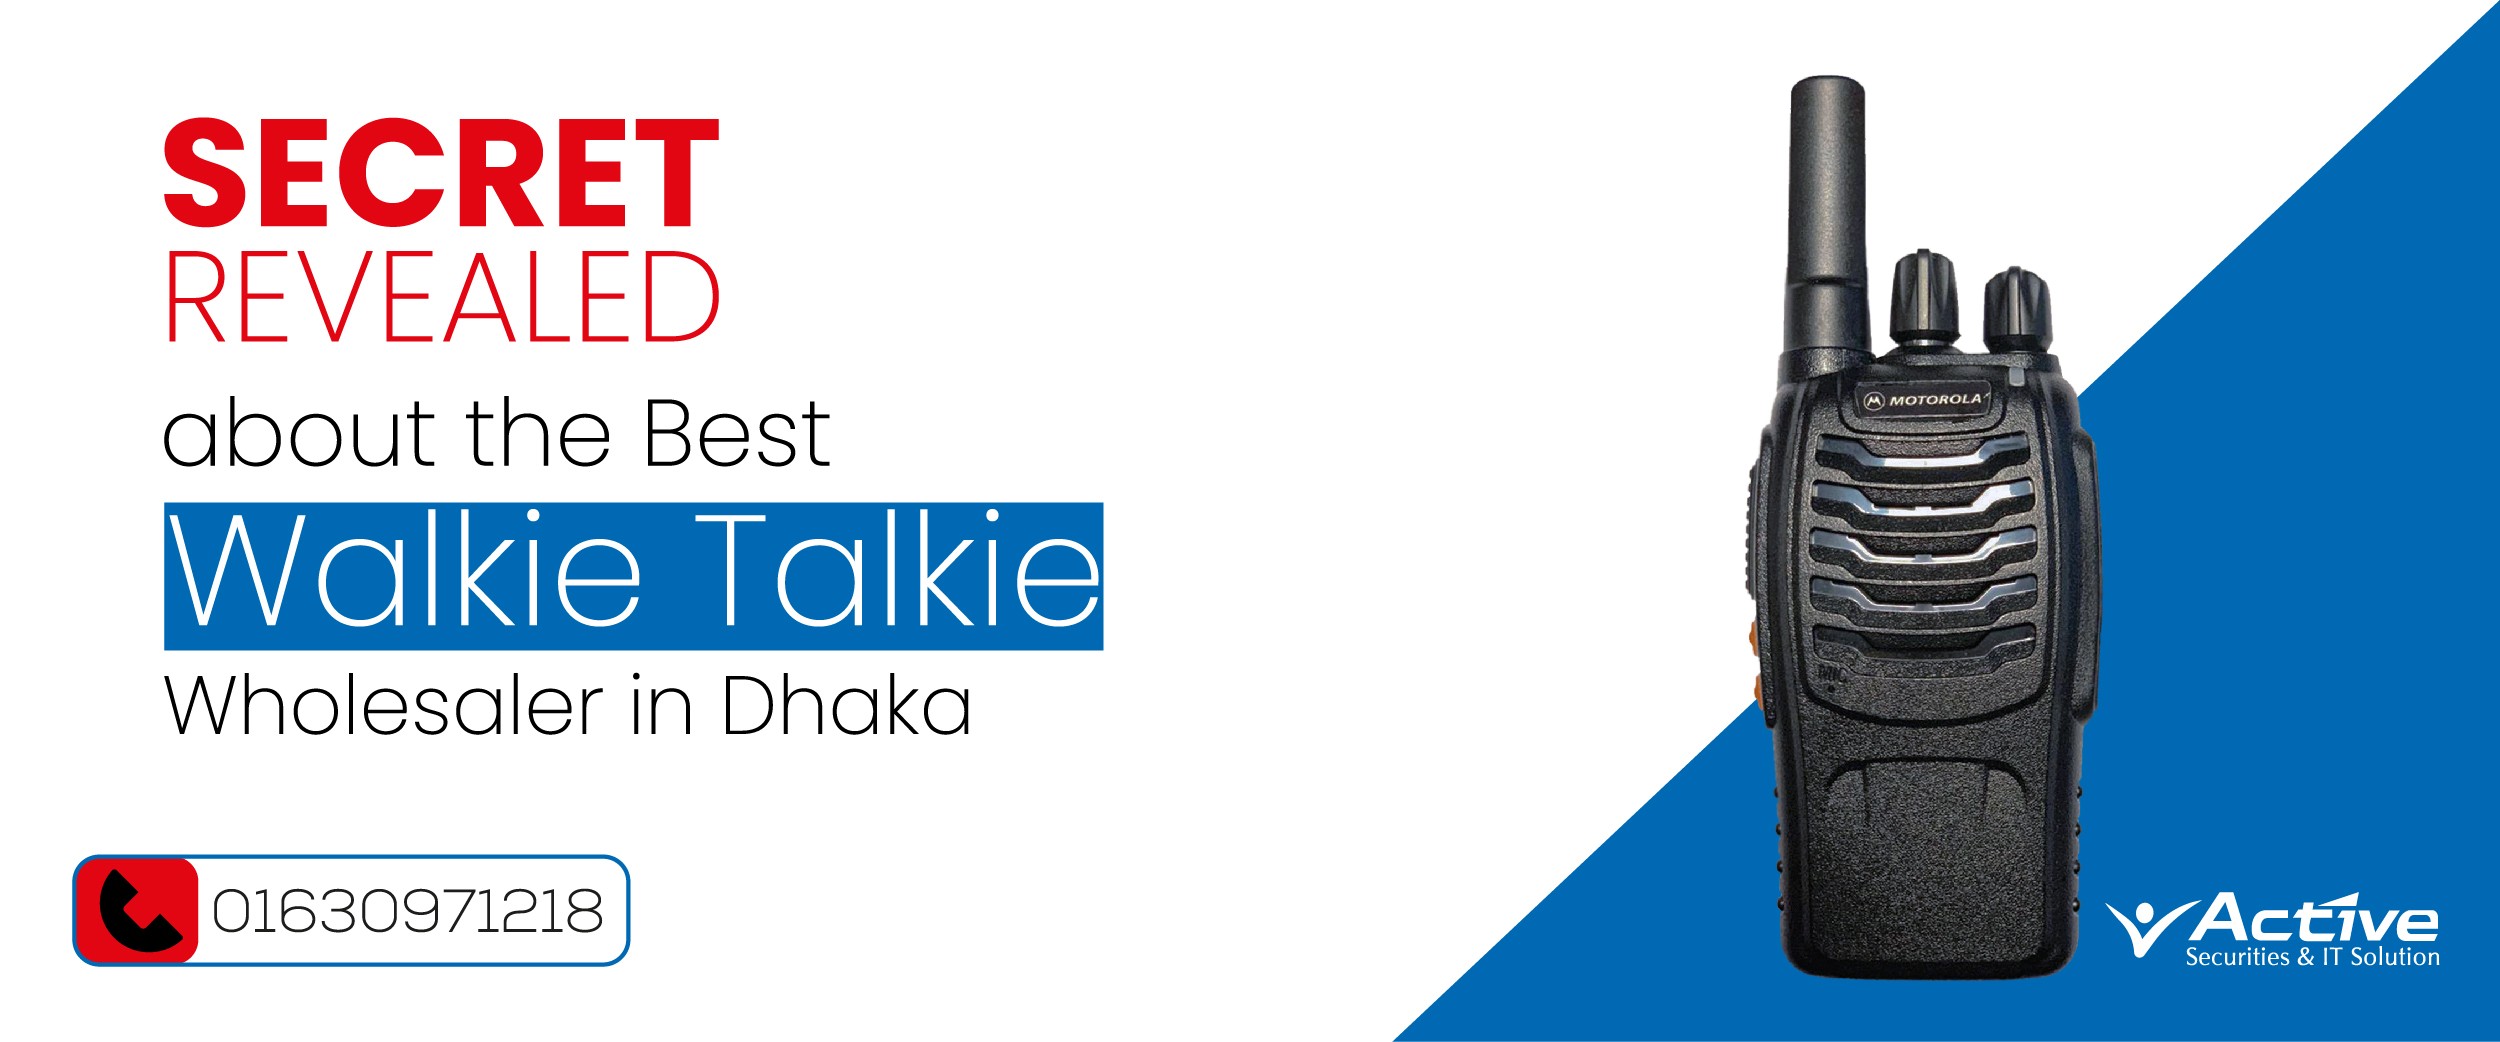 Secret Revealed about the Best Walkie Talkie Wholesaler in Dhaka| Authorized Supplier